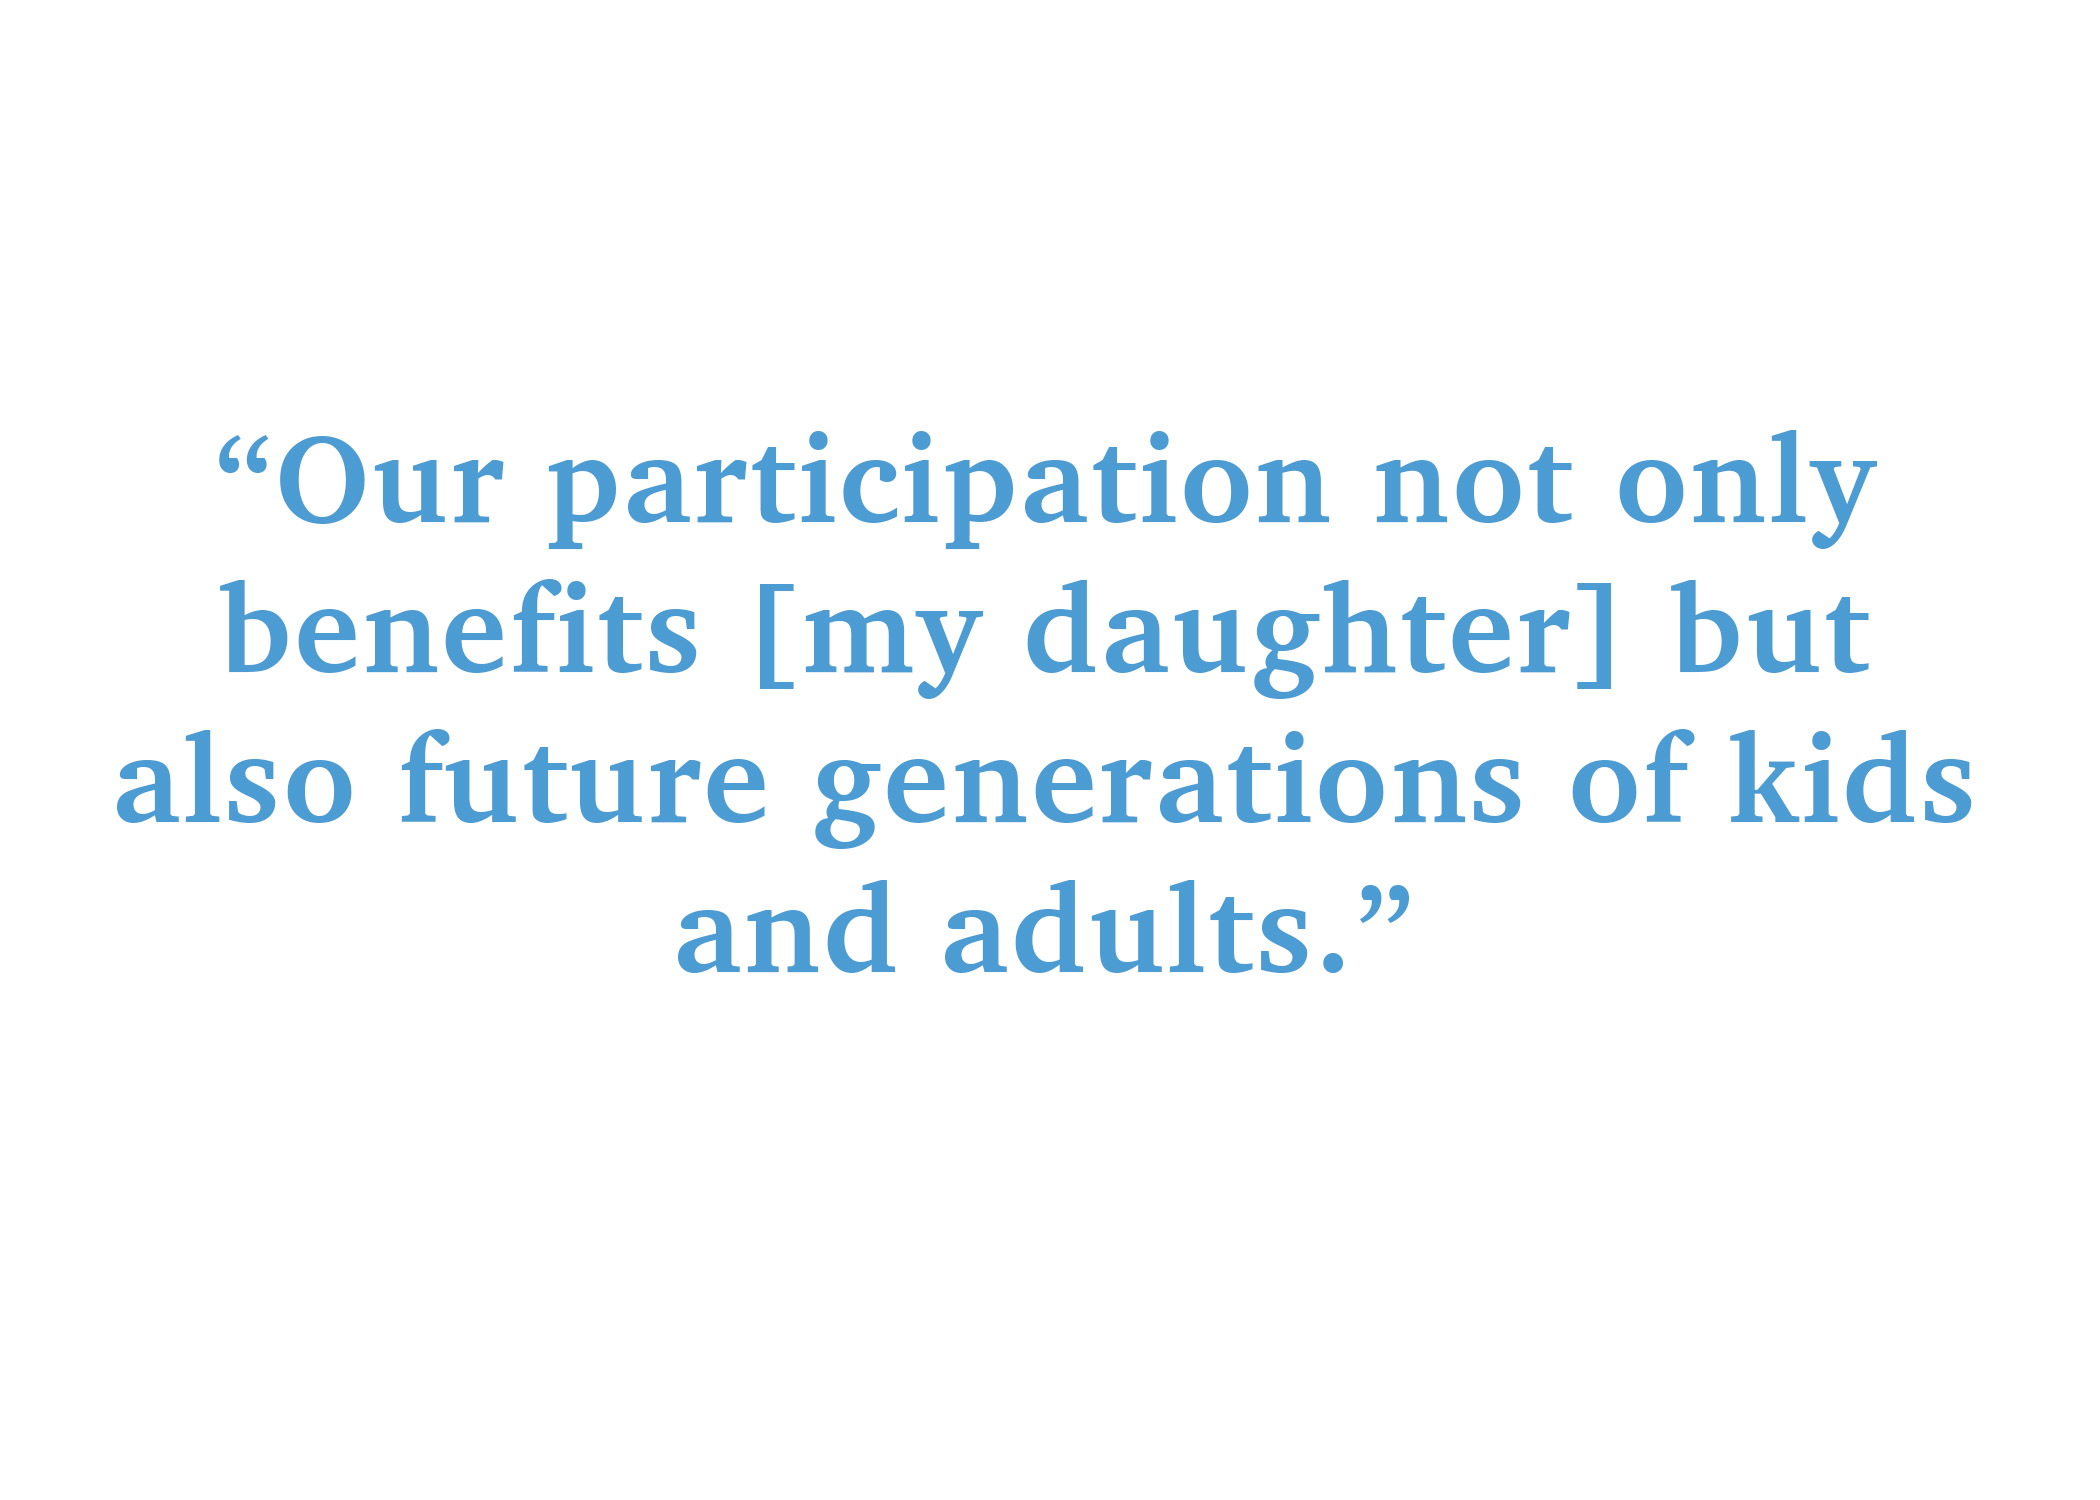 Our participation not only benefits my daughter, but also future generations of kids and adults.